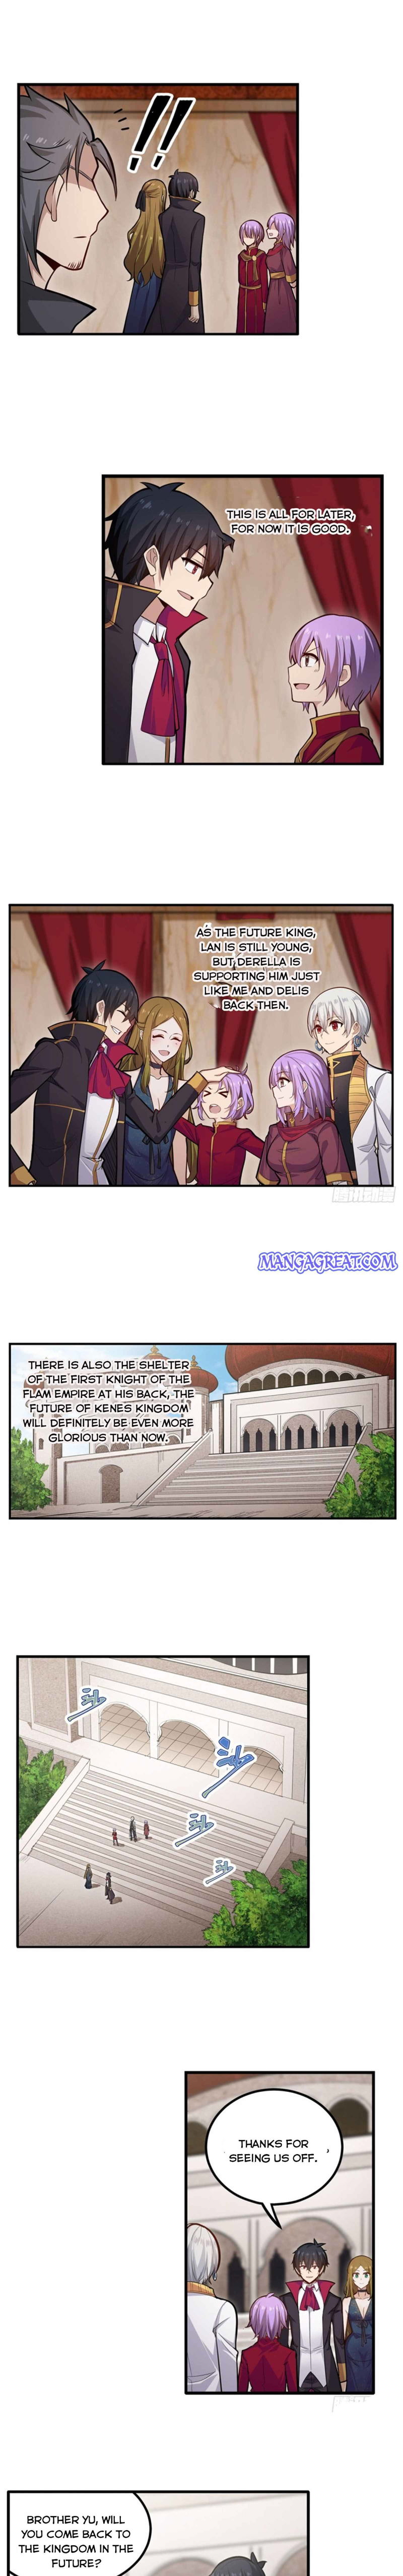 Infinite Apostles and Twelve War Girls Chapter 187 page 4